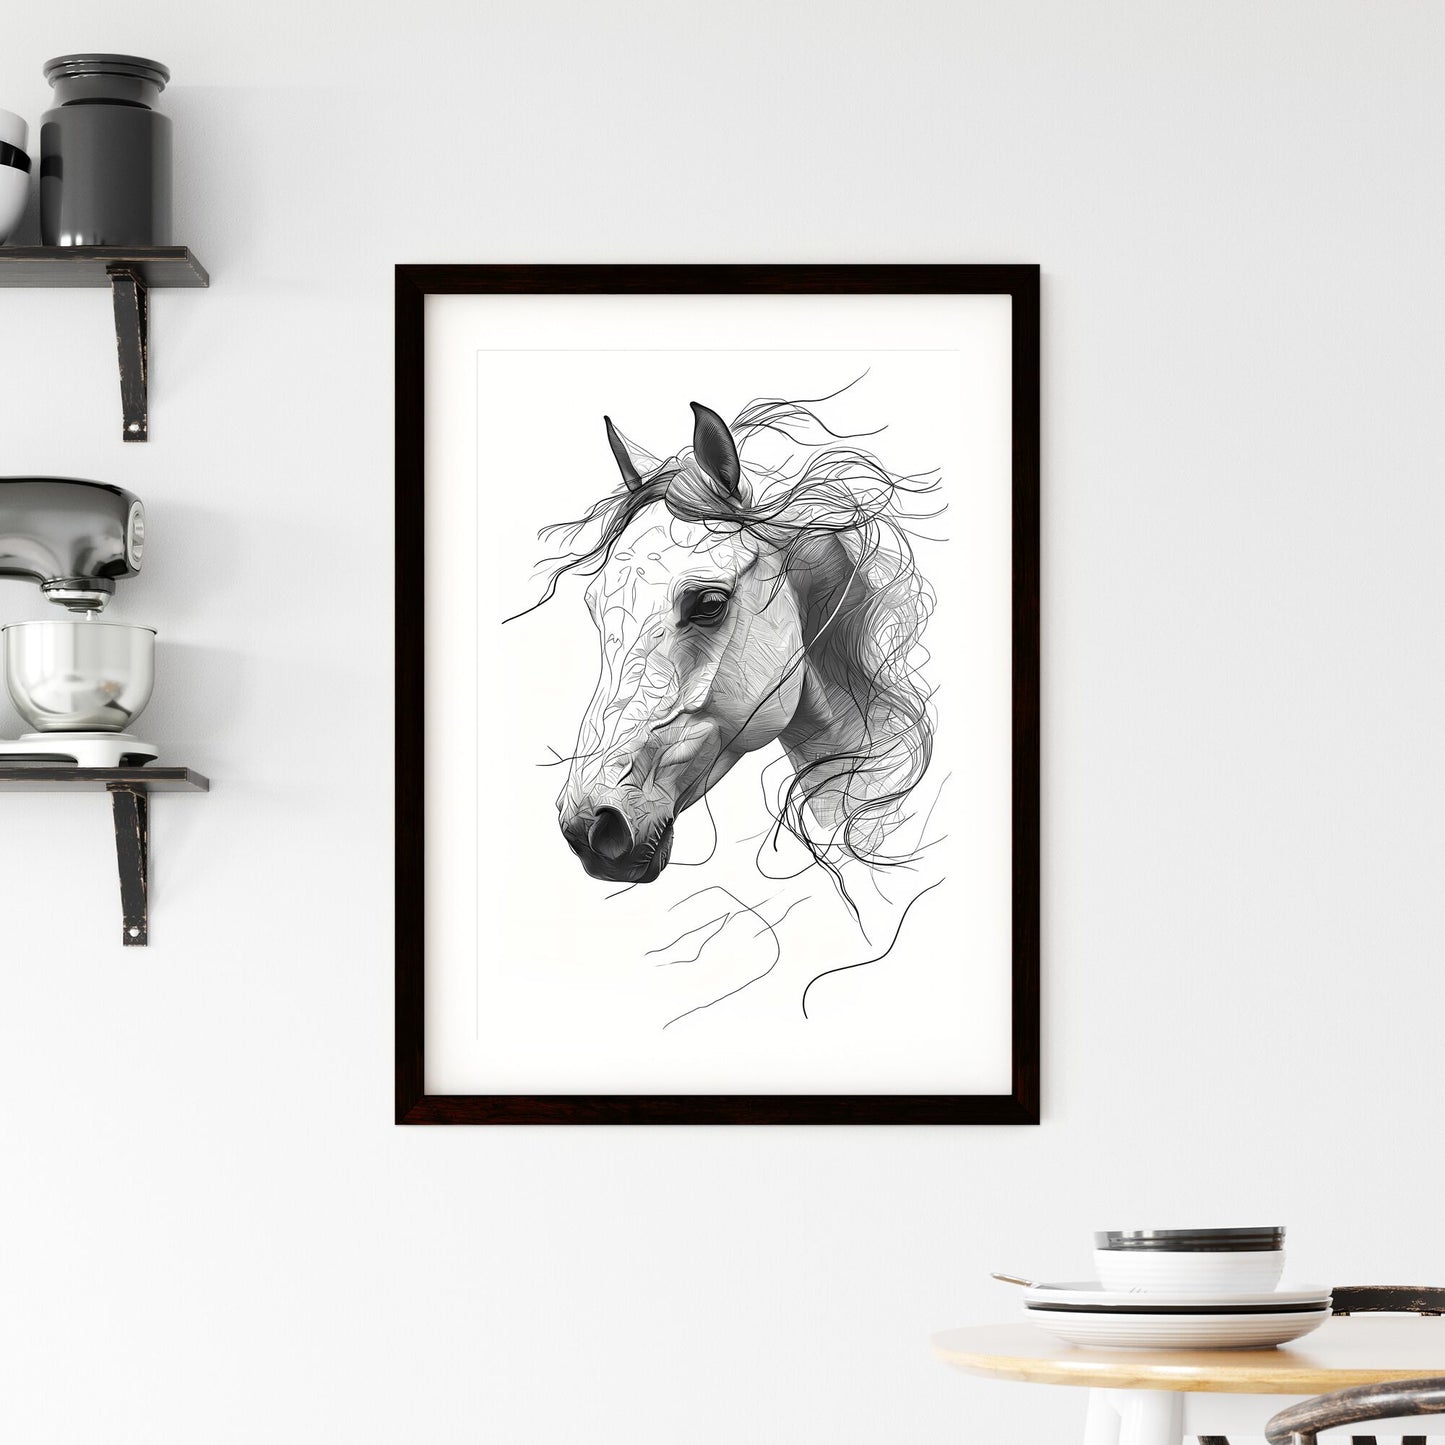 A Poster of a line art drawing of a horses face - A Horse With Long Hair Default Title